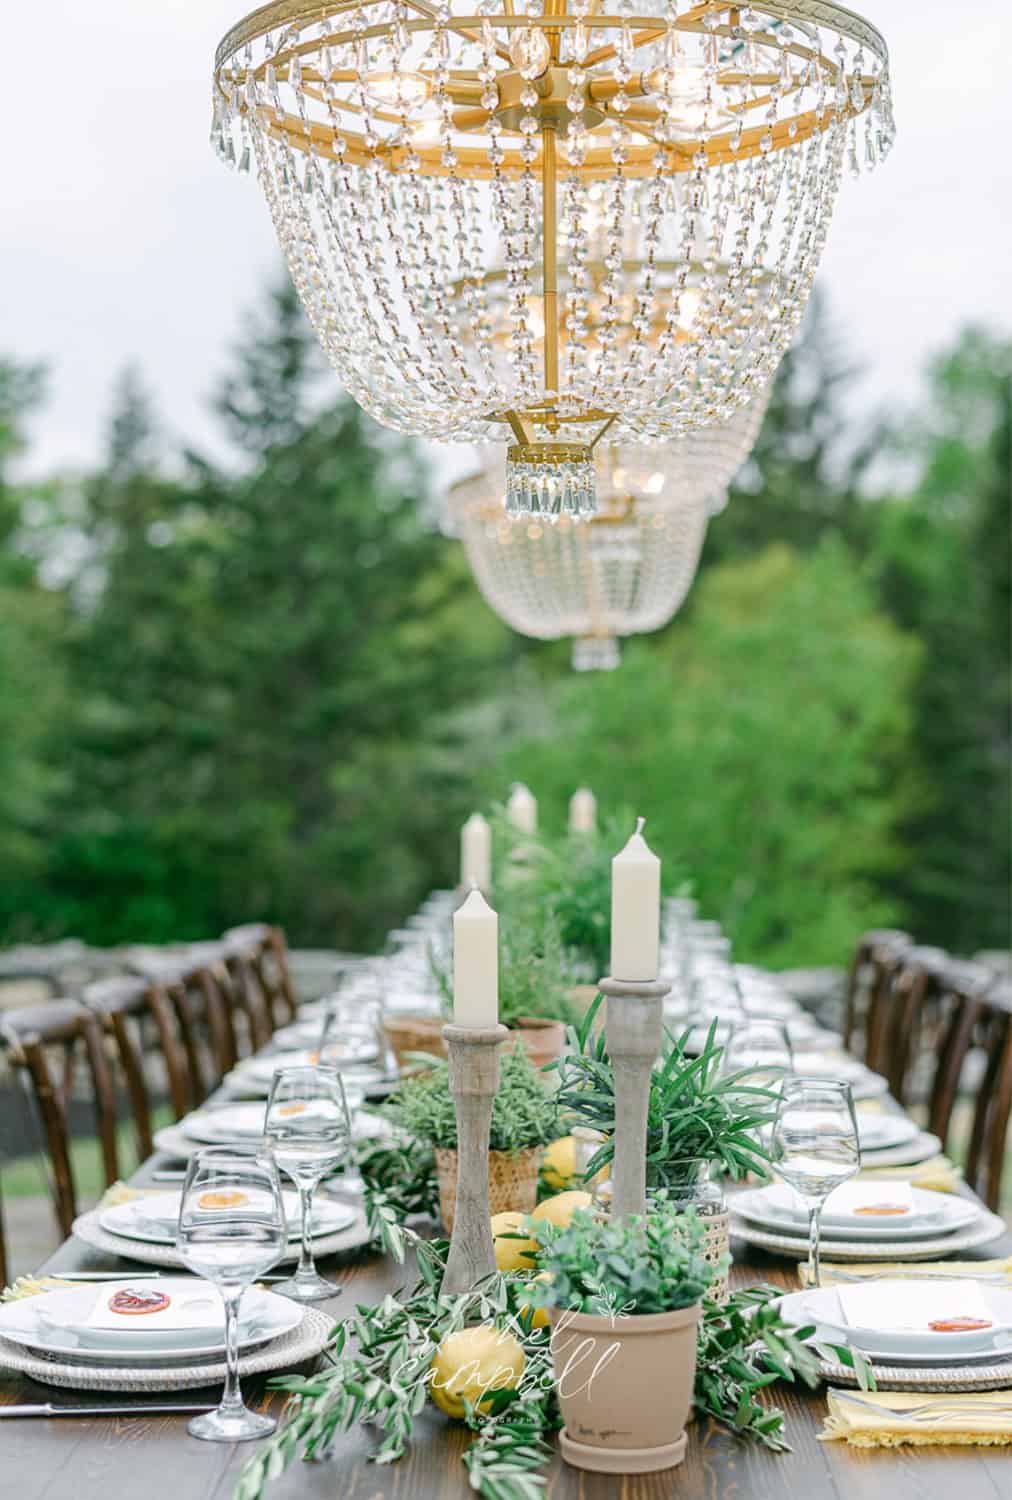 Elegant outdoor table with a crystal chandelier, adorned with candles, greenery, and set with fine dinnerware.